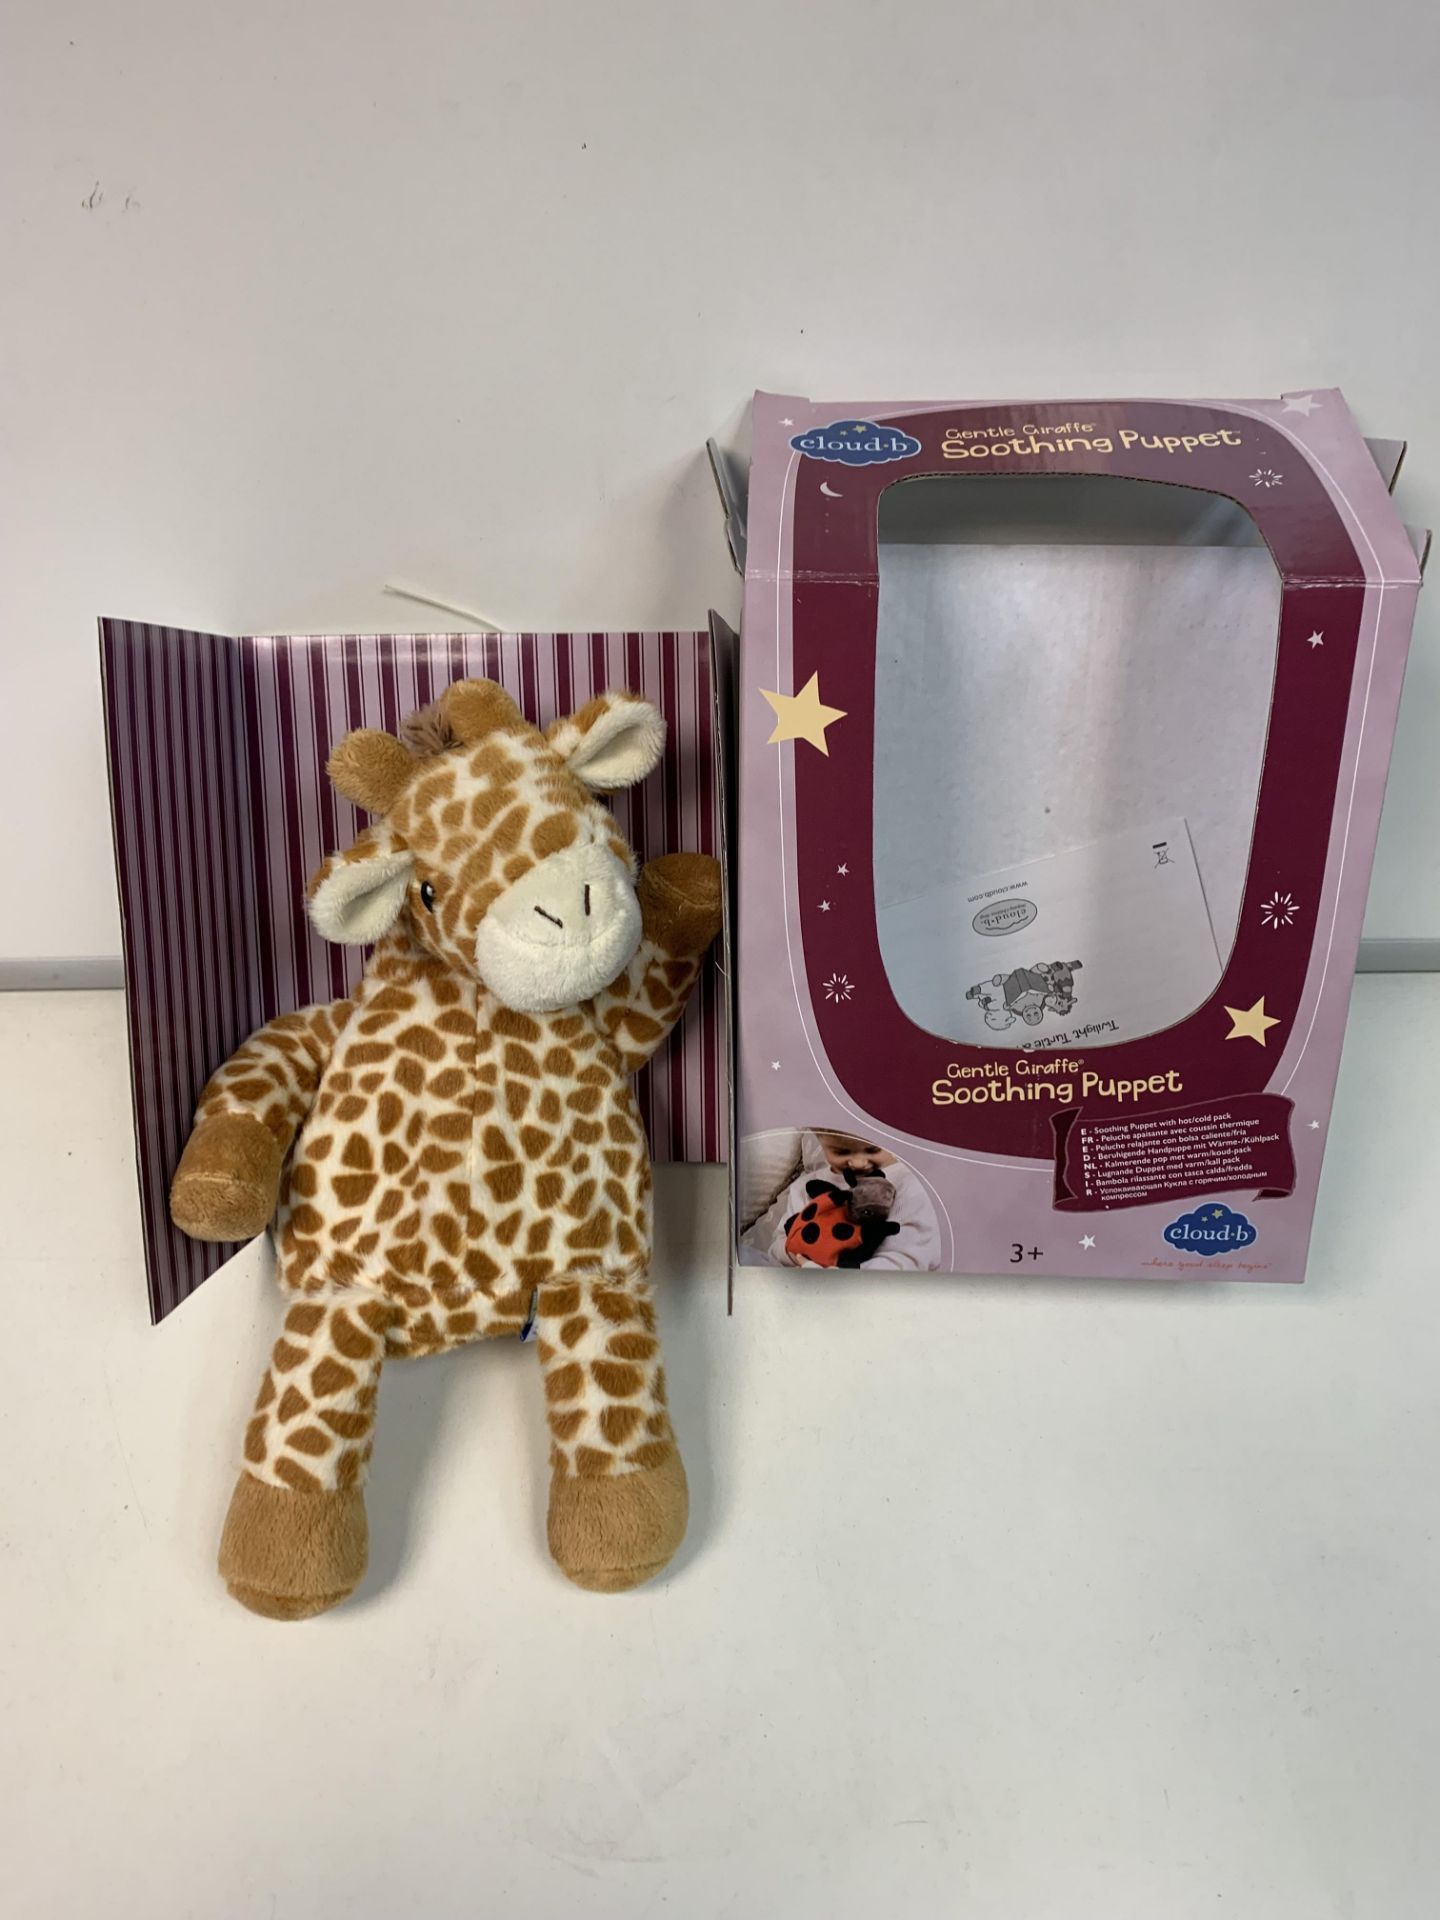 6 X NEW BOXED CLOUD-B TWILIGHT GENTLE GIRAFFE SOOTHING PUPPET WITH HOT/COLD PACK. A WARM HUG ON A